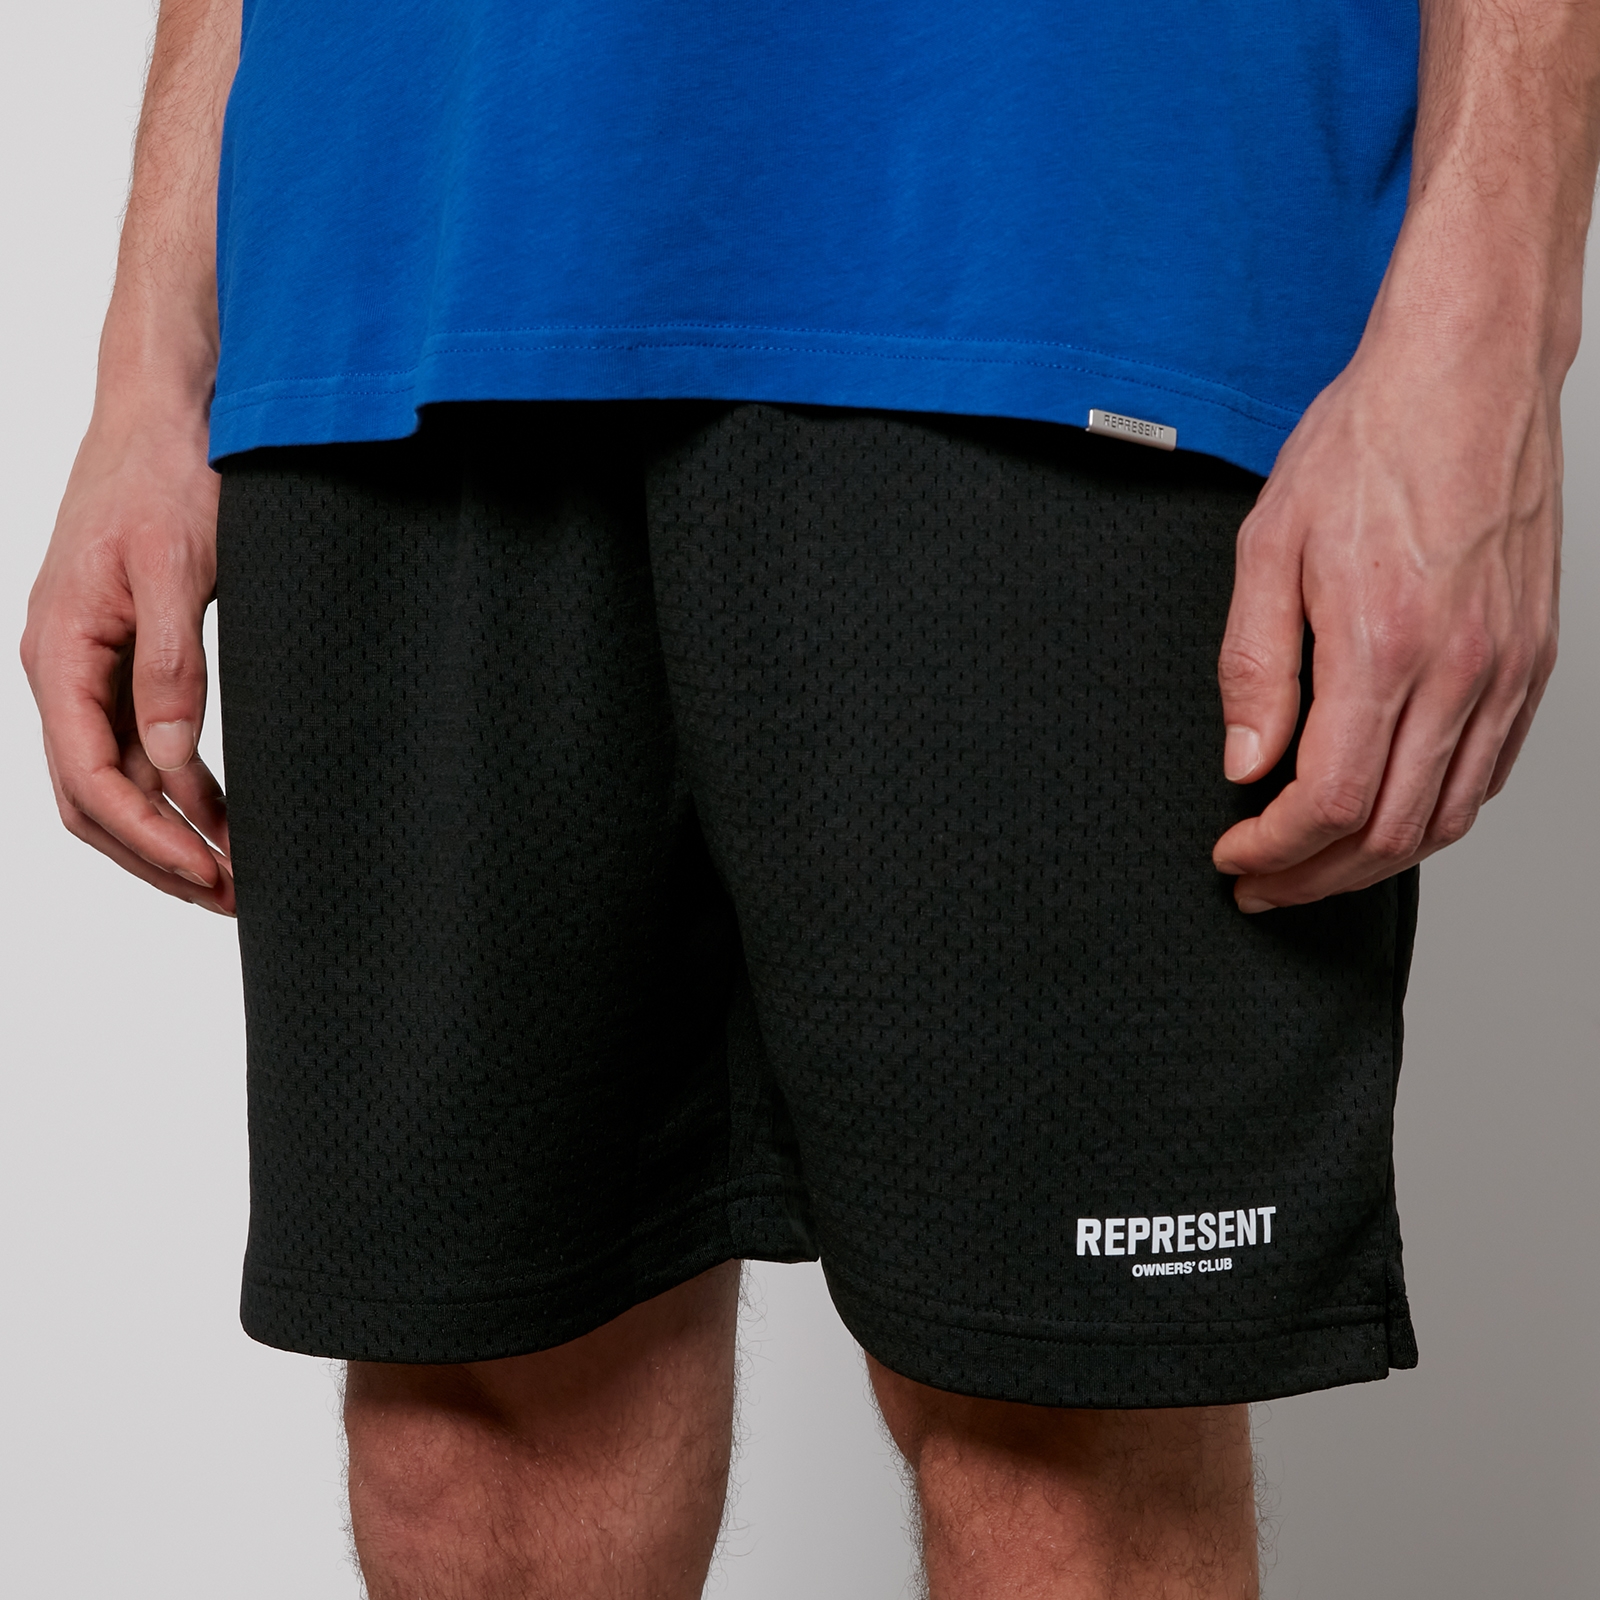 REPRESENT Owners Club jersey-mesh shorts